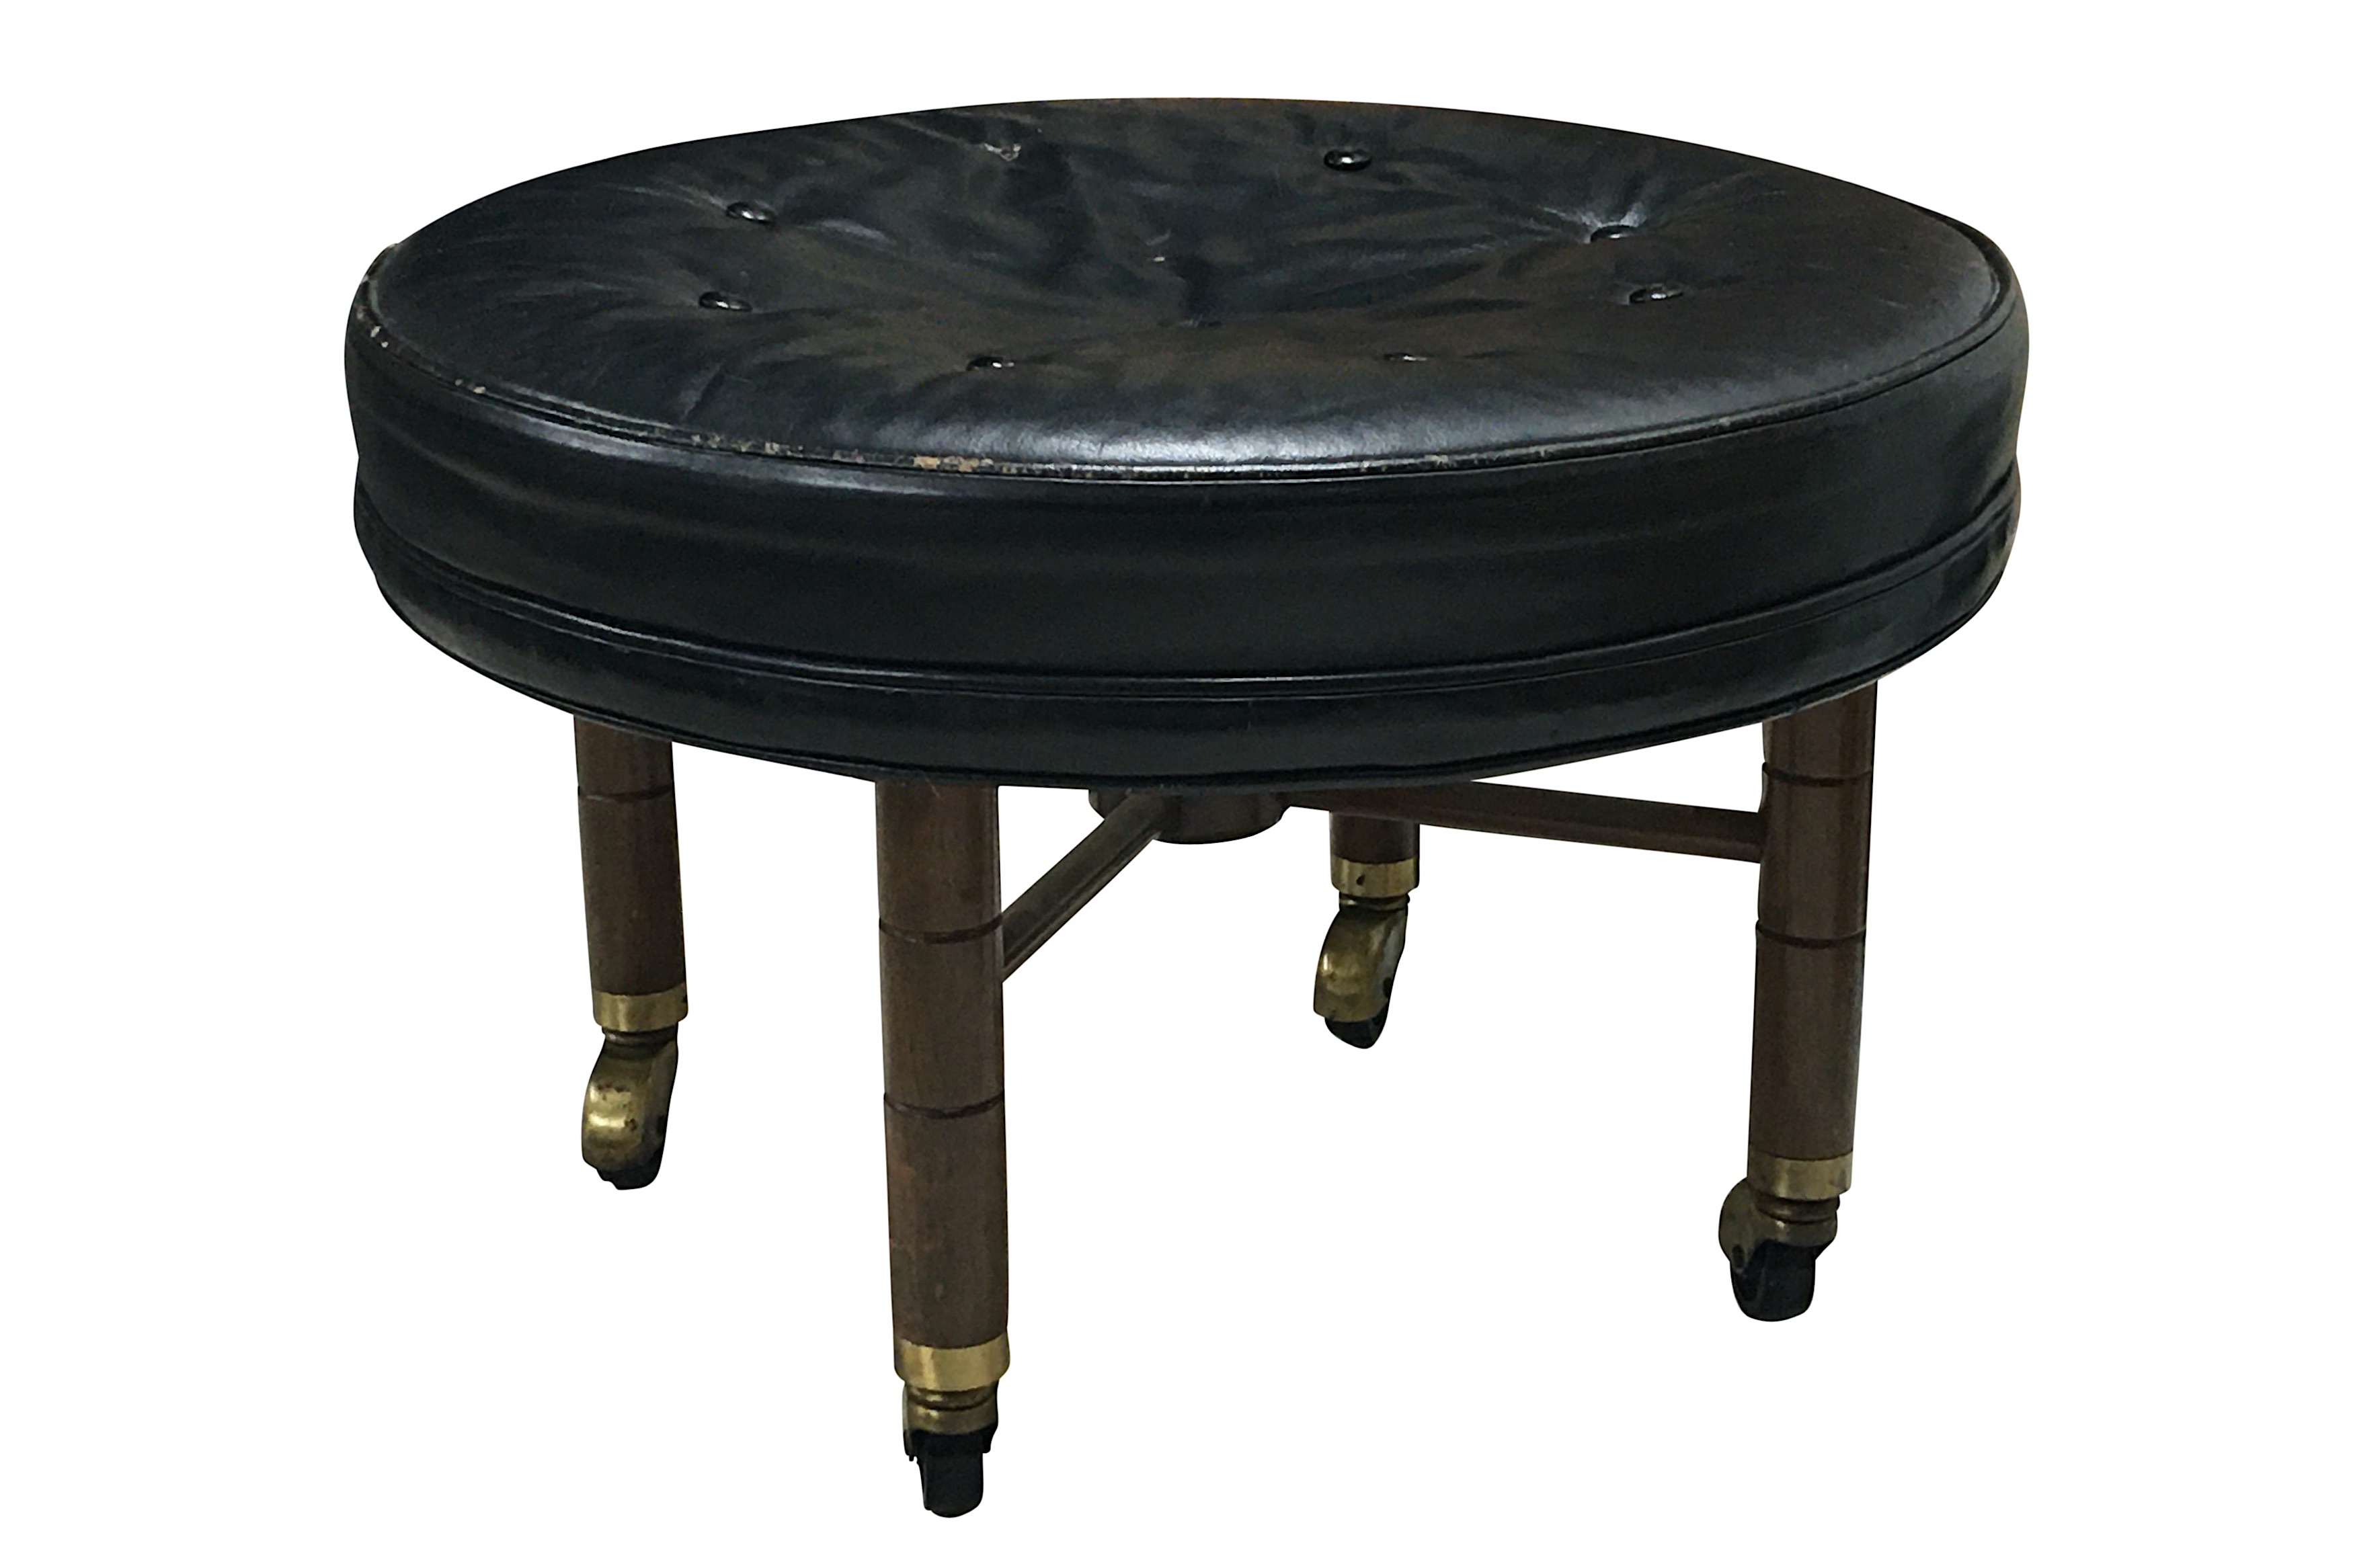 An American leather stool, 1950s